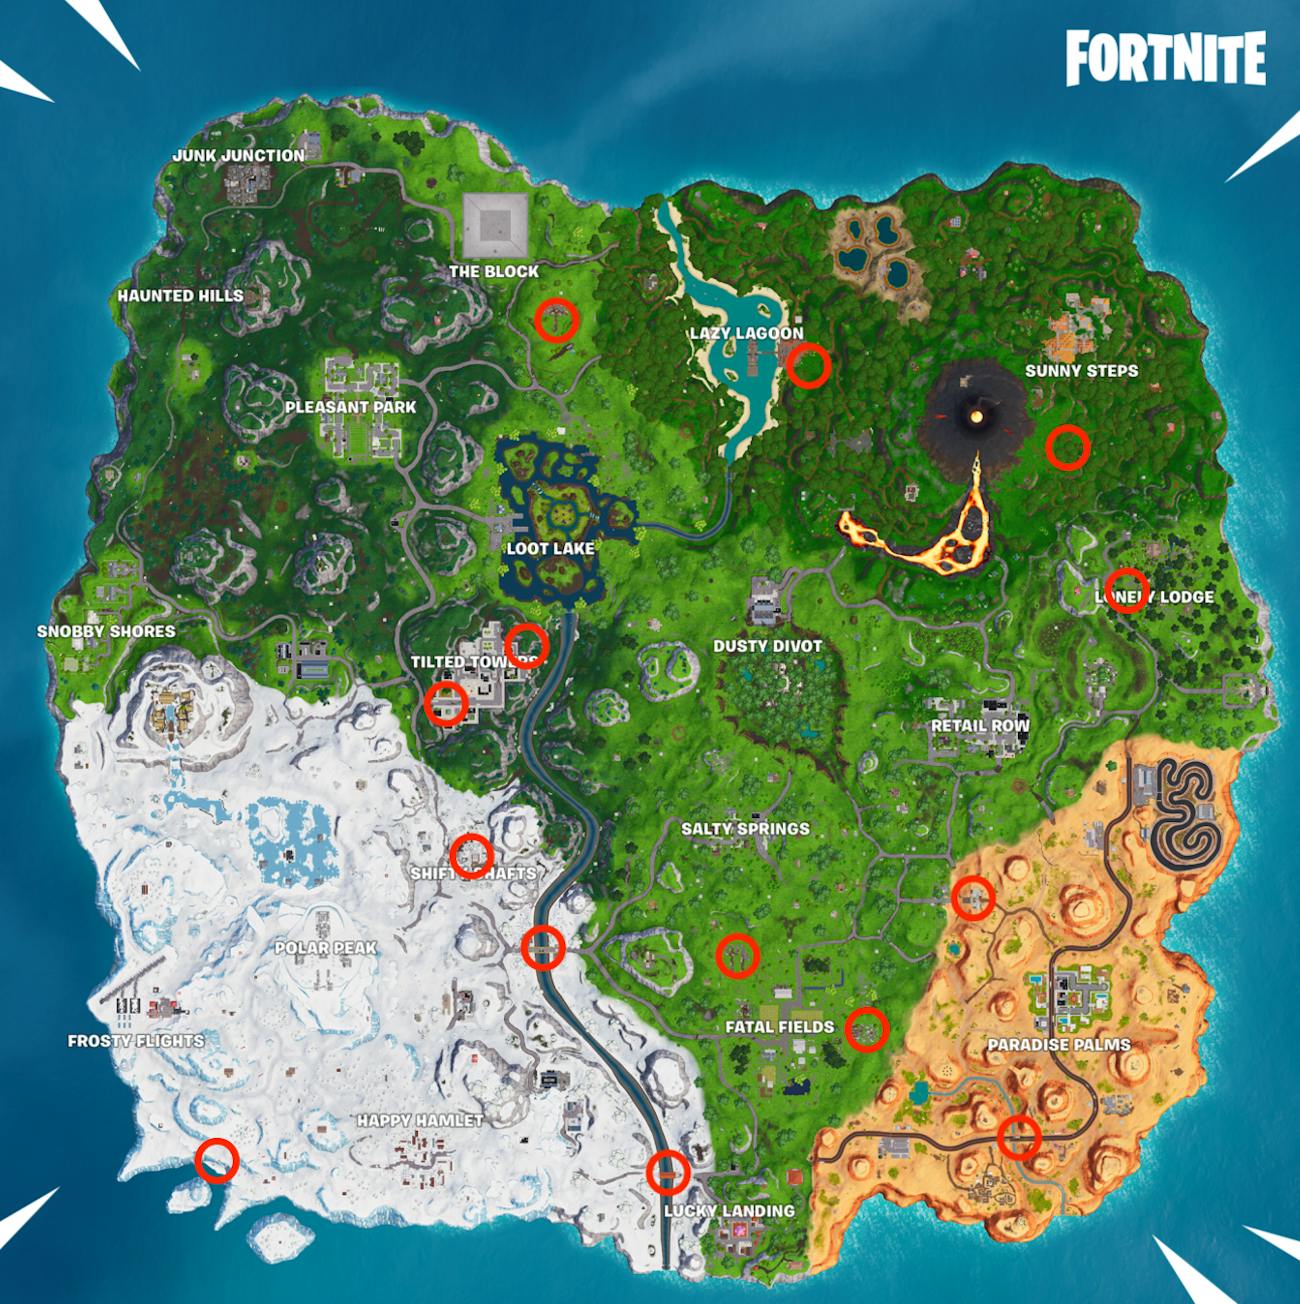 Fortnite Puzzle Pieces Season 8 Locations Map And Video Guide - fortnite season 8 week 8 jigsaw puzzle piece map